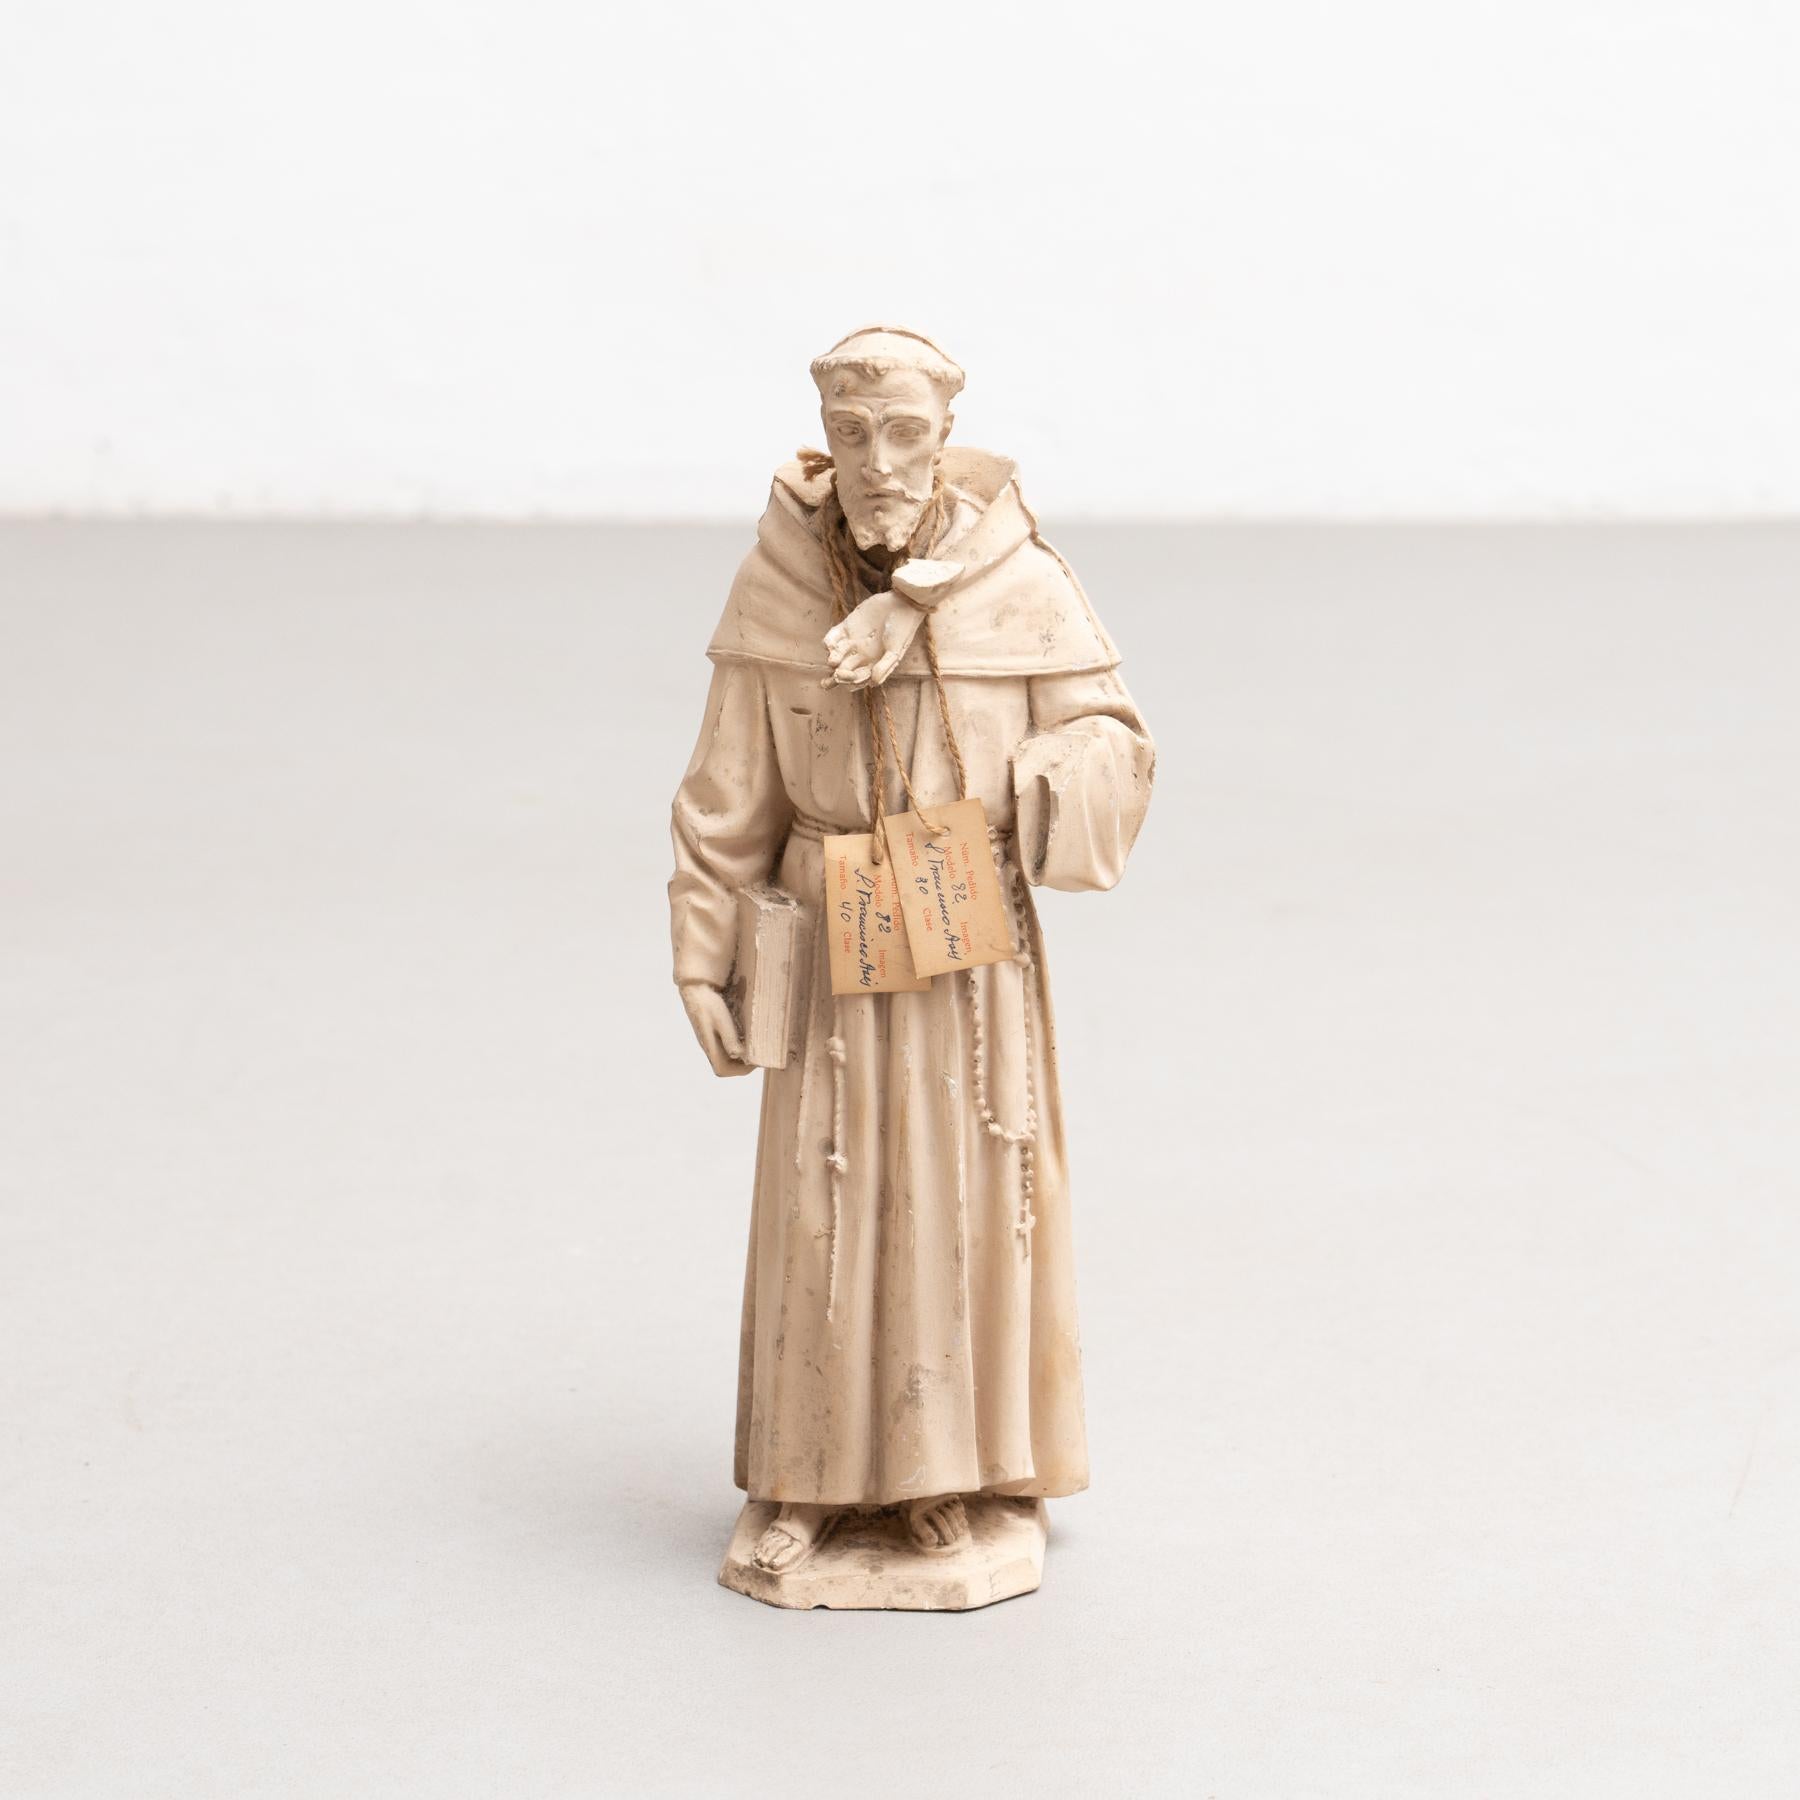 Traditional religious plaster figure of a saint.

Made in traditional Catalan atelier in Olot, Spain, circa 1950.

In original condition, with minor wear consistent with age and use, preserving a beautiful patina.

Olot has a long tradition in